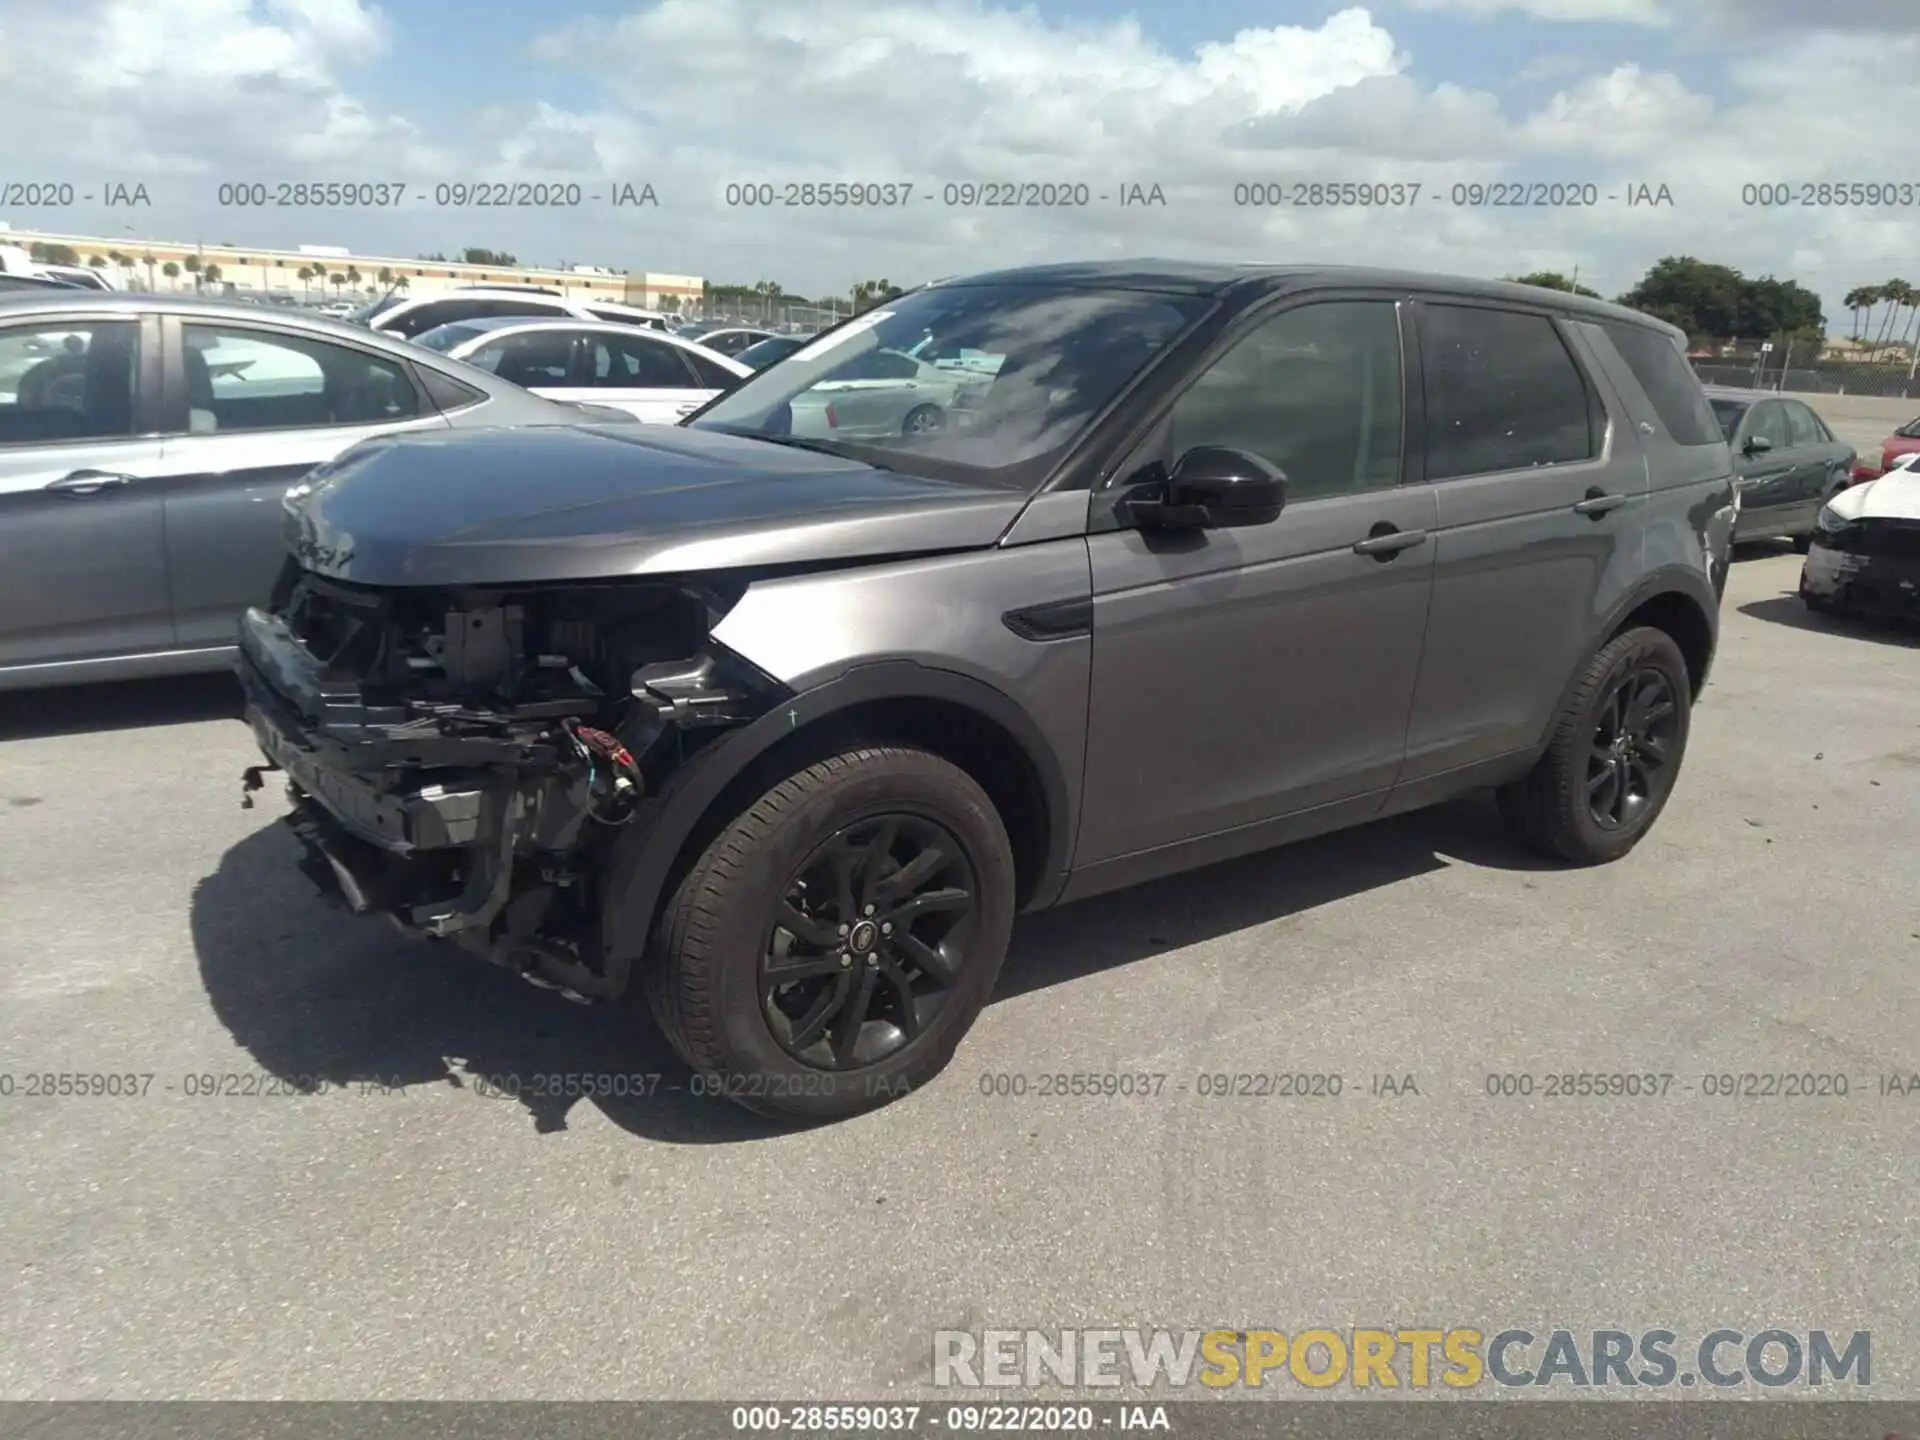 2 Photograph of a damaged car SALCP2FX9KH821278 LAND ROVER DISCOVERY SPORT 2019